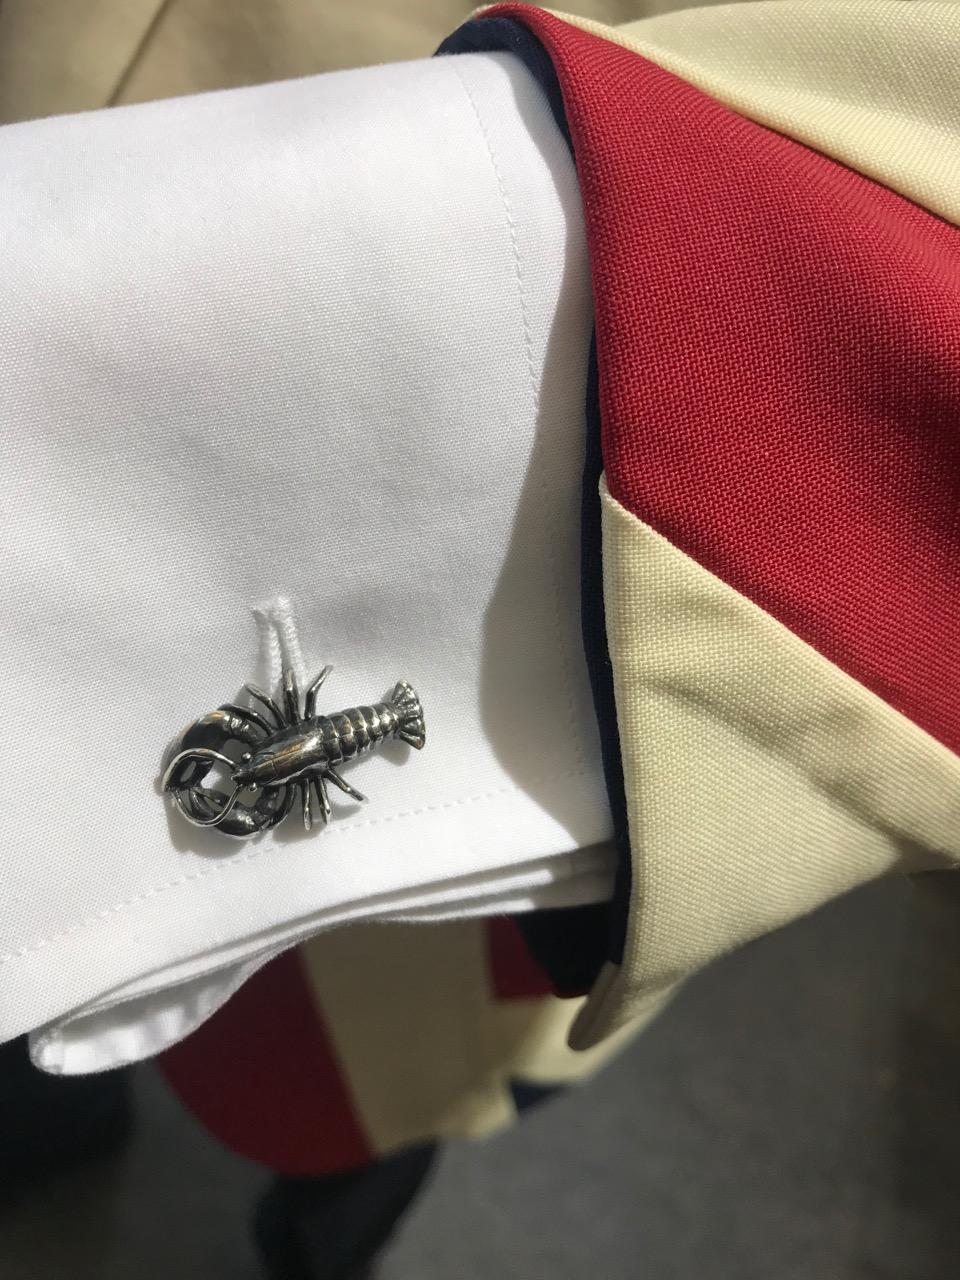 DEAKIN & FRANCIS, Piccadilly Arcade, London

A pinching sea creature or a delicious dish, whichever tickles your fancy, these snappy, sterling silver lobster cufflinks are a treat for the cuff, secured with domed oval spring link fittings! With an